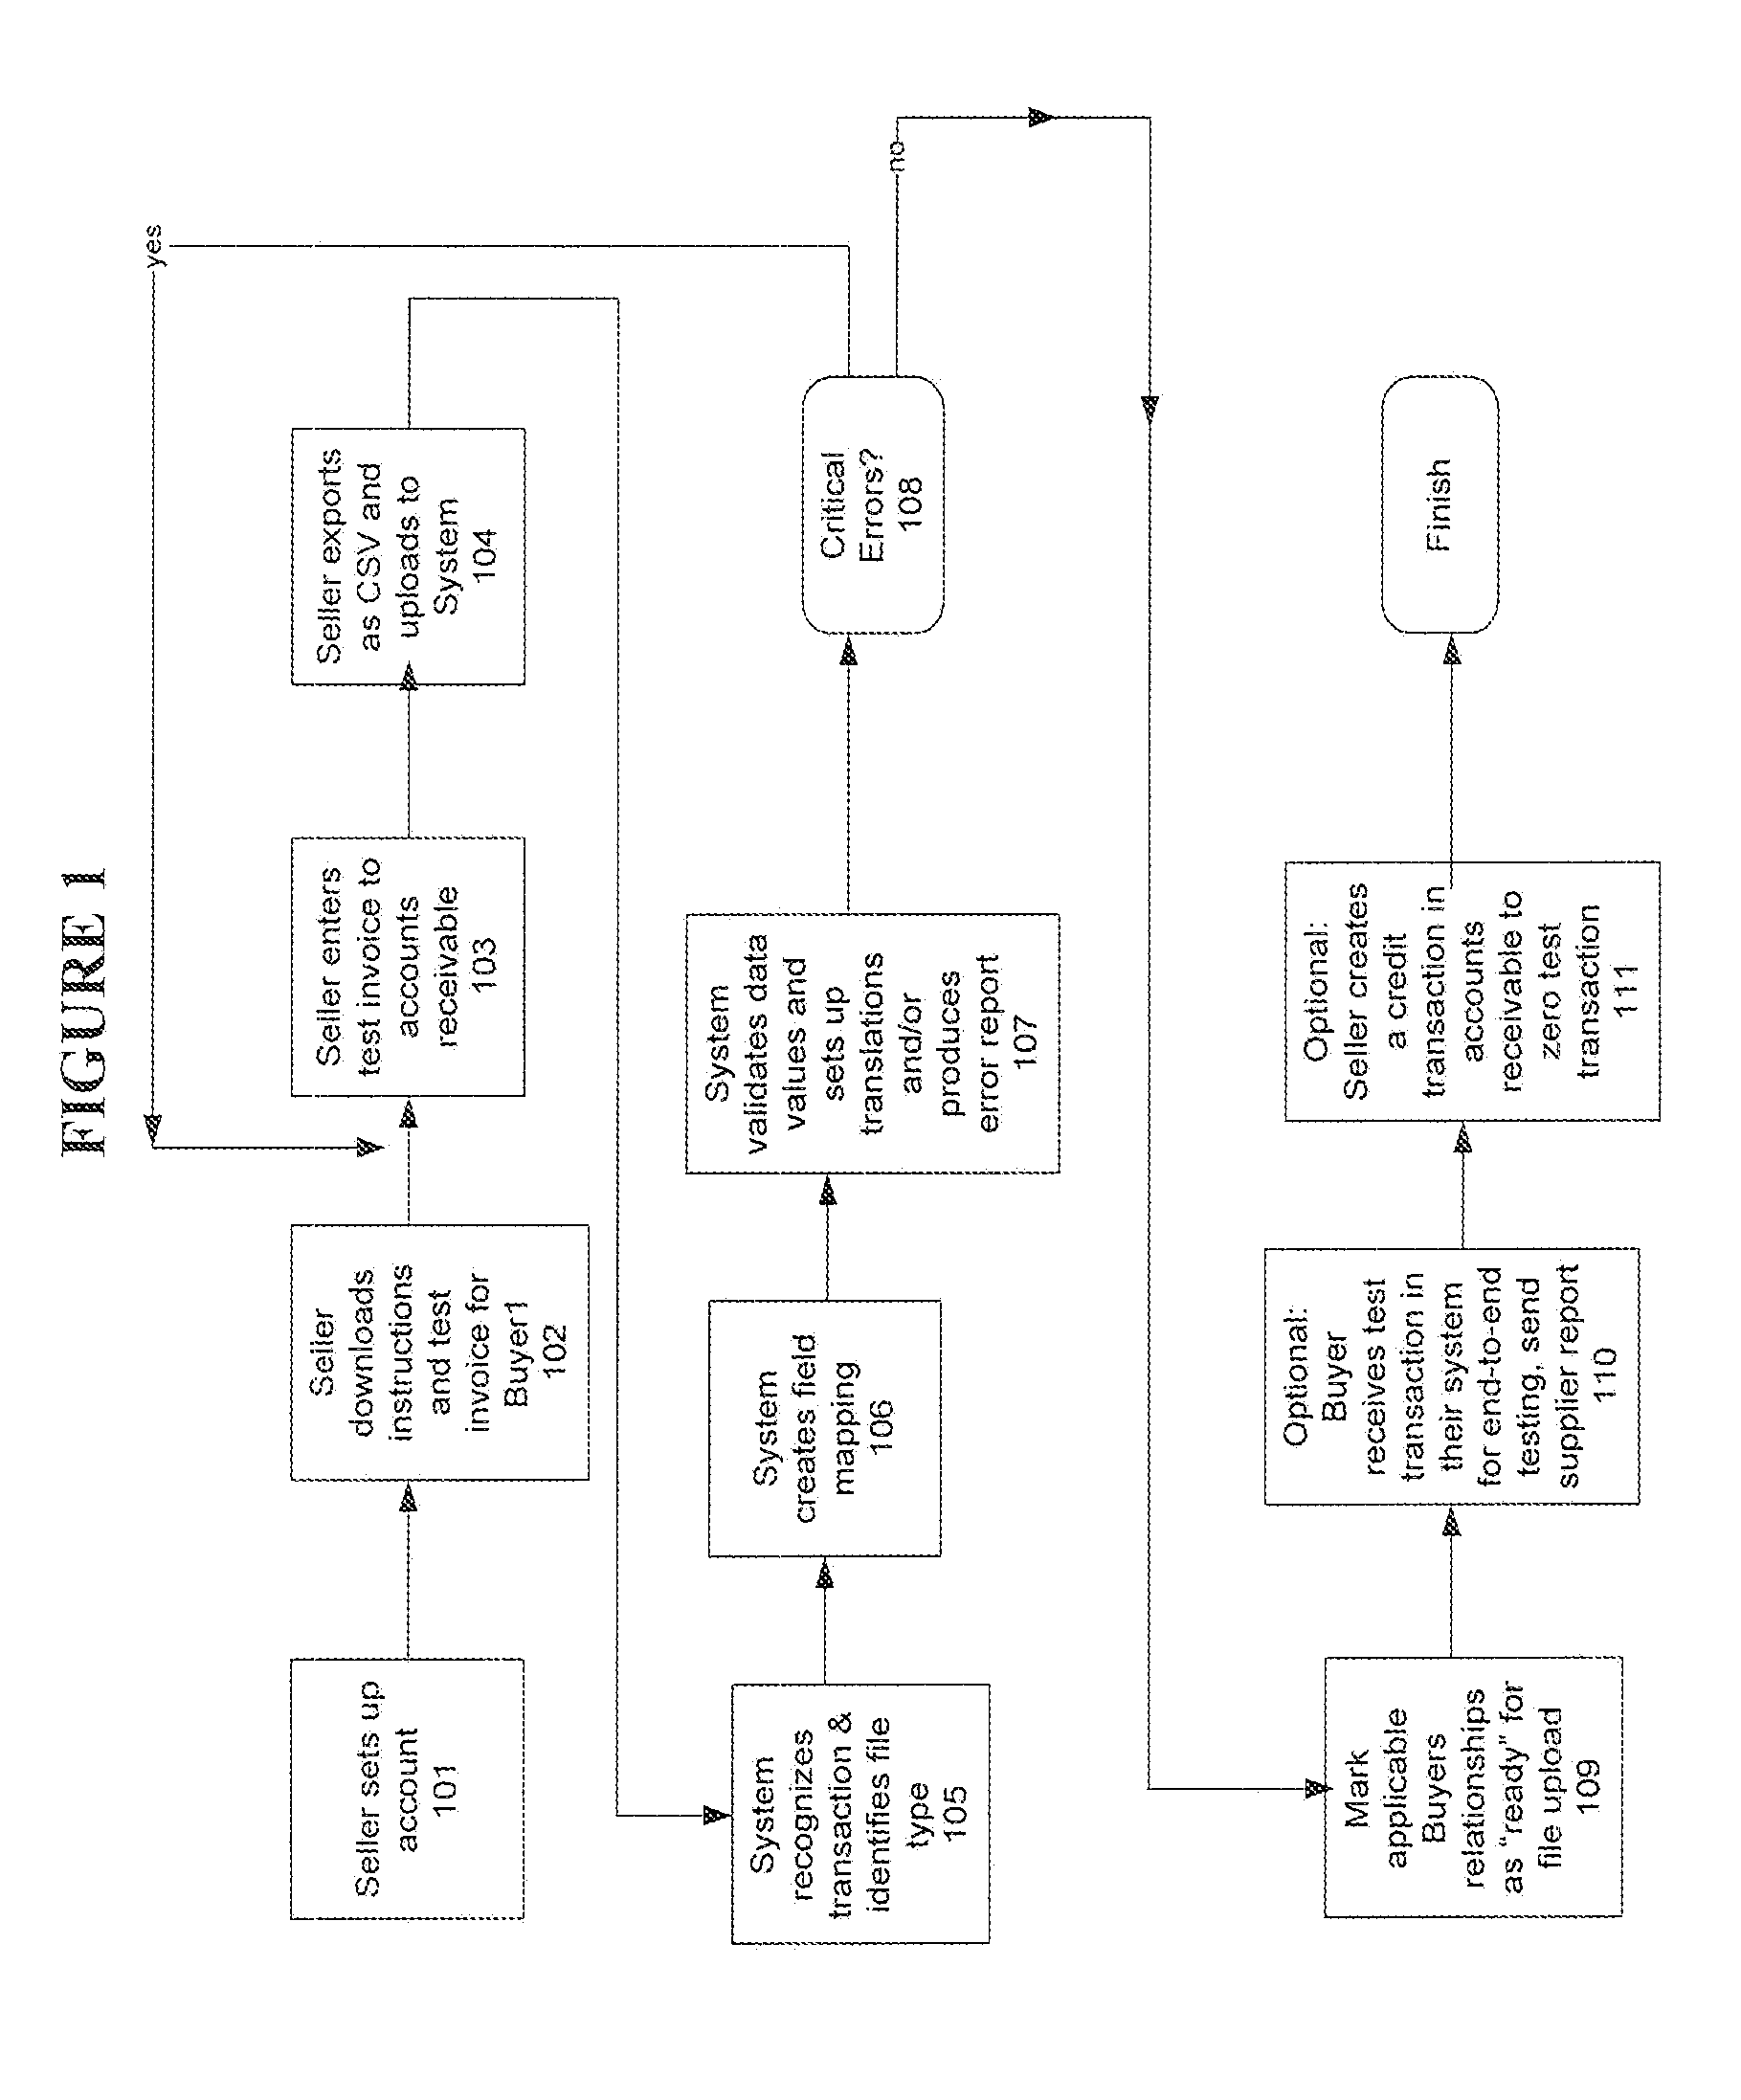 Systems and methods for automated invoice entry